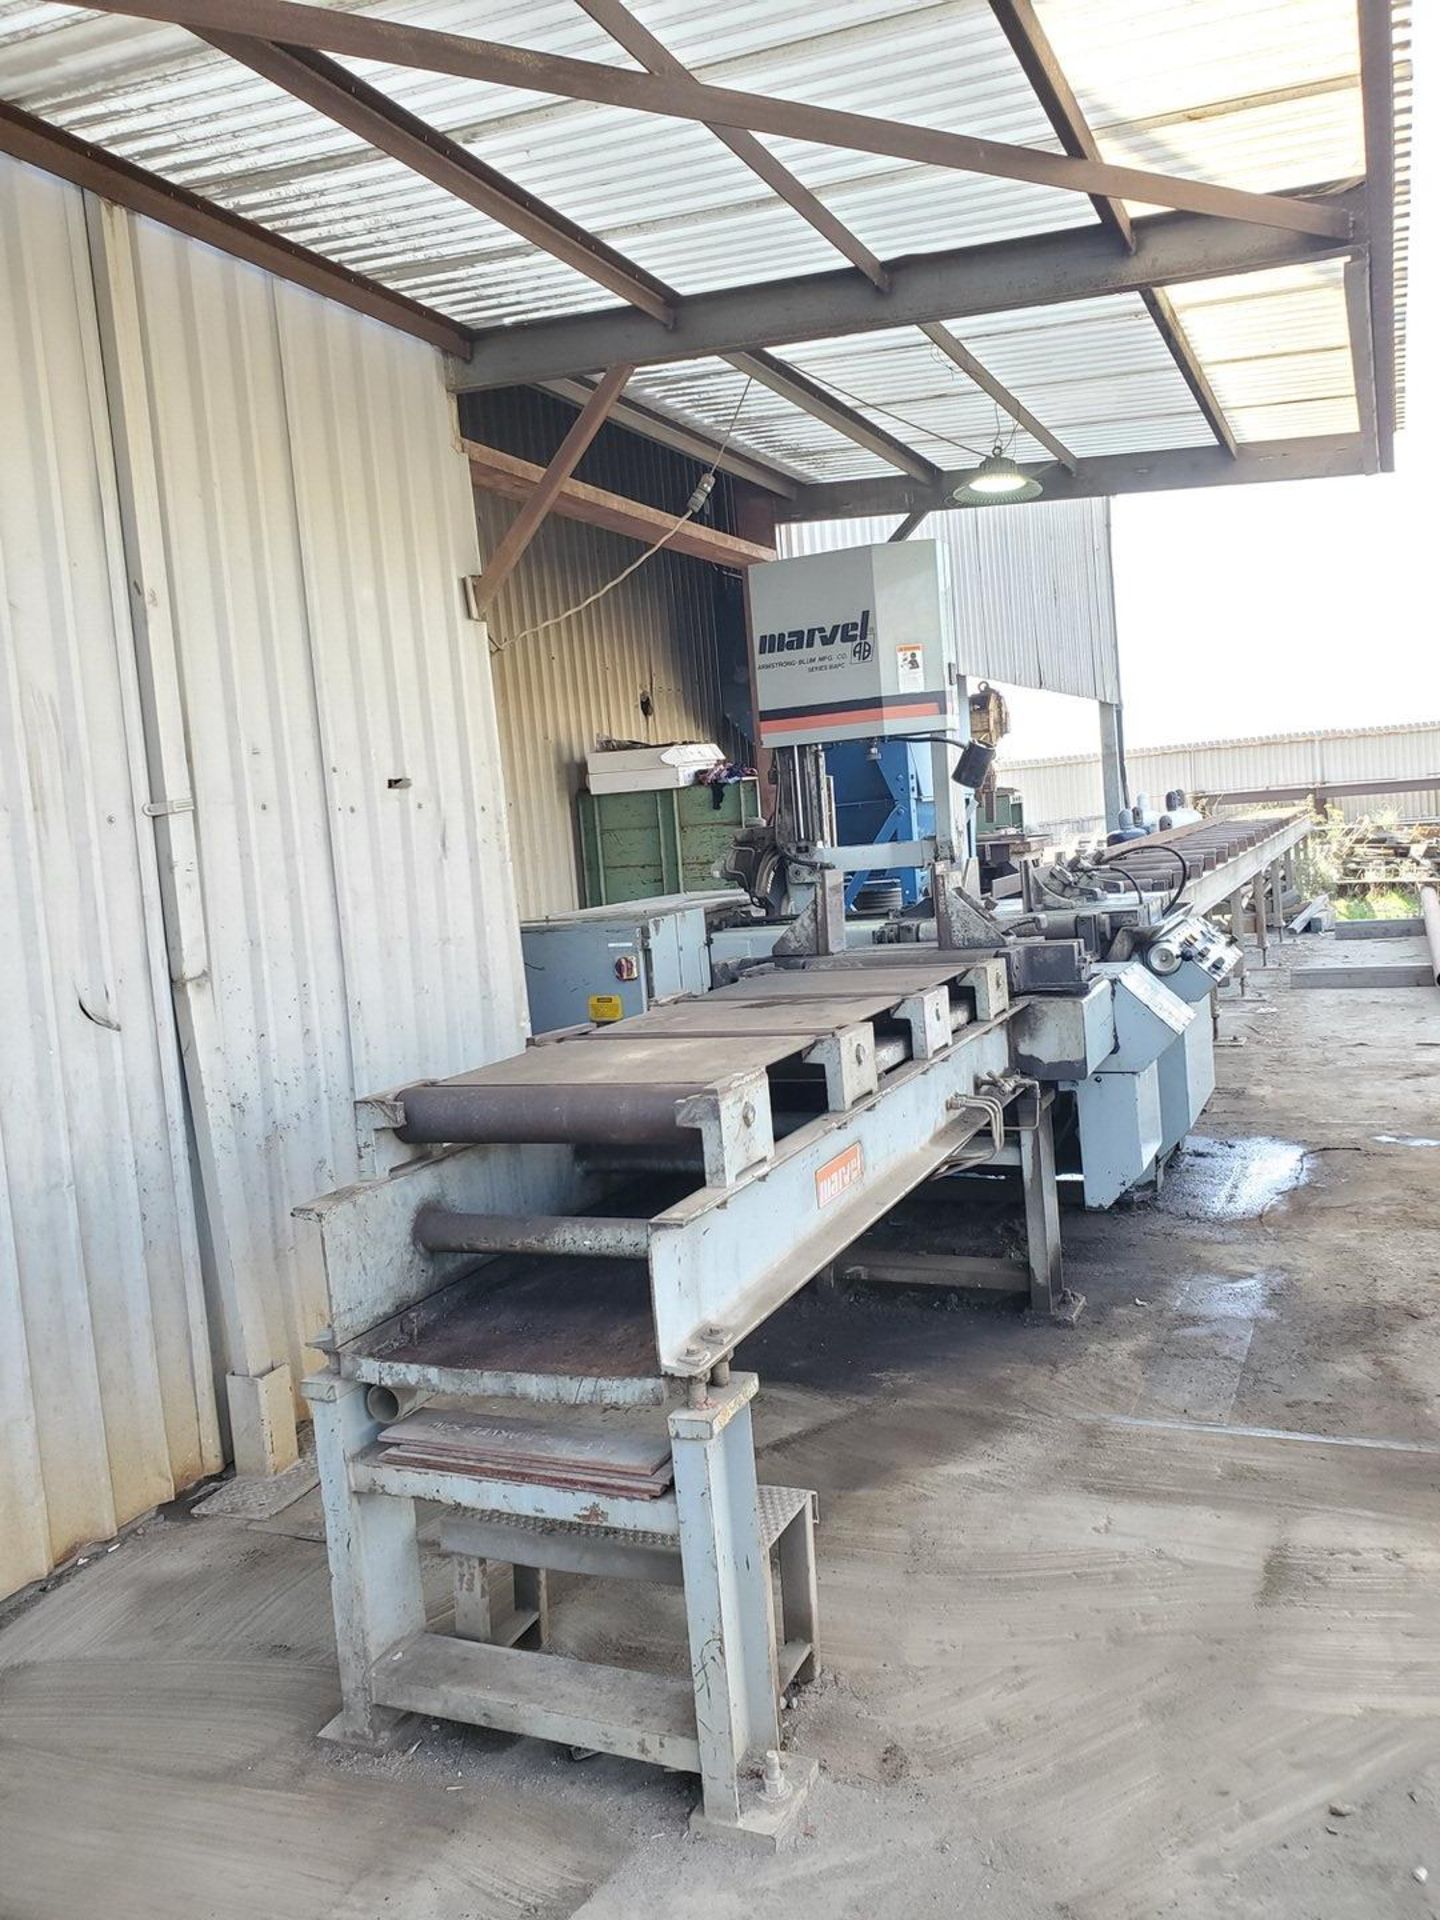 Marvel M5 20"x18" Vertical Band Saw - Image 3 of 25